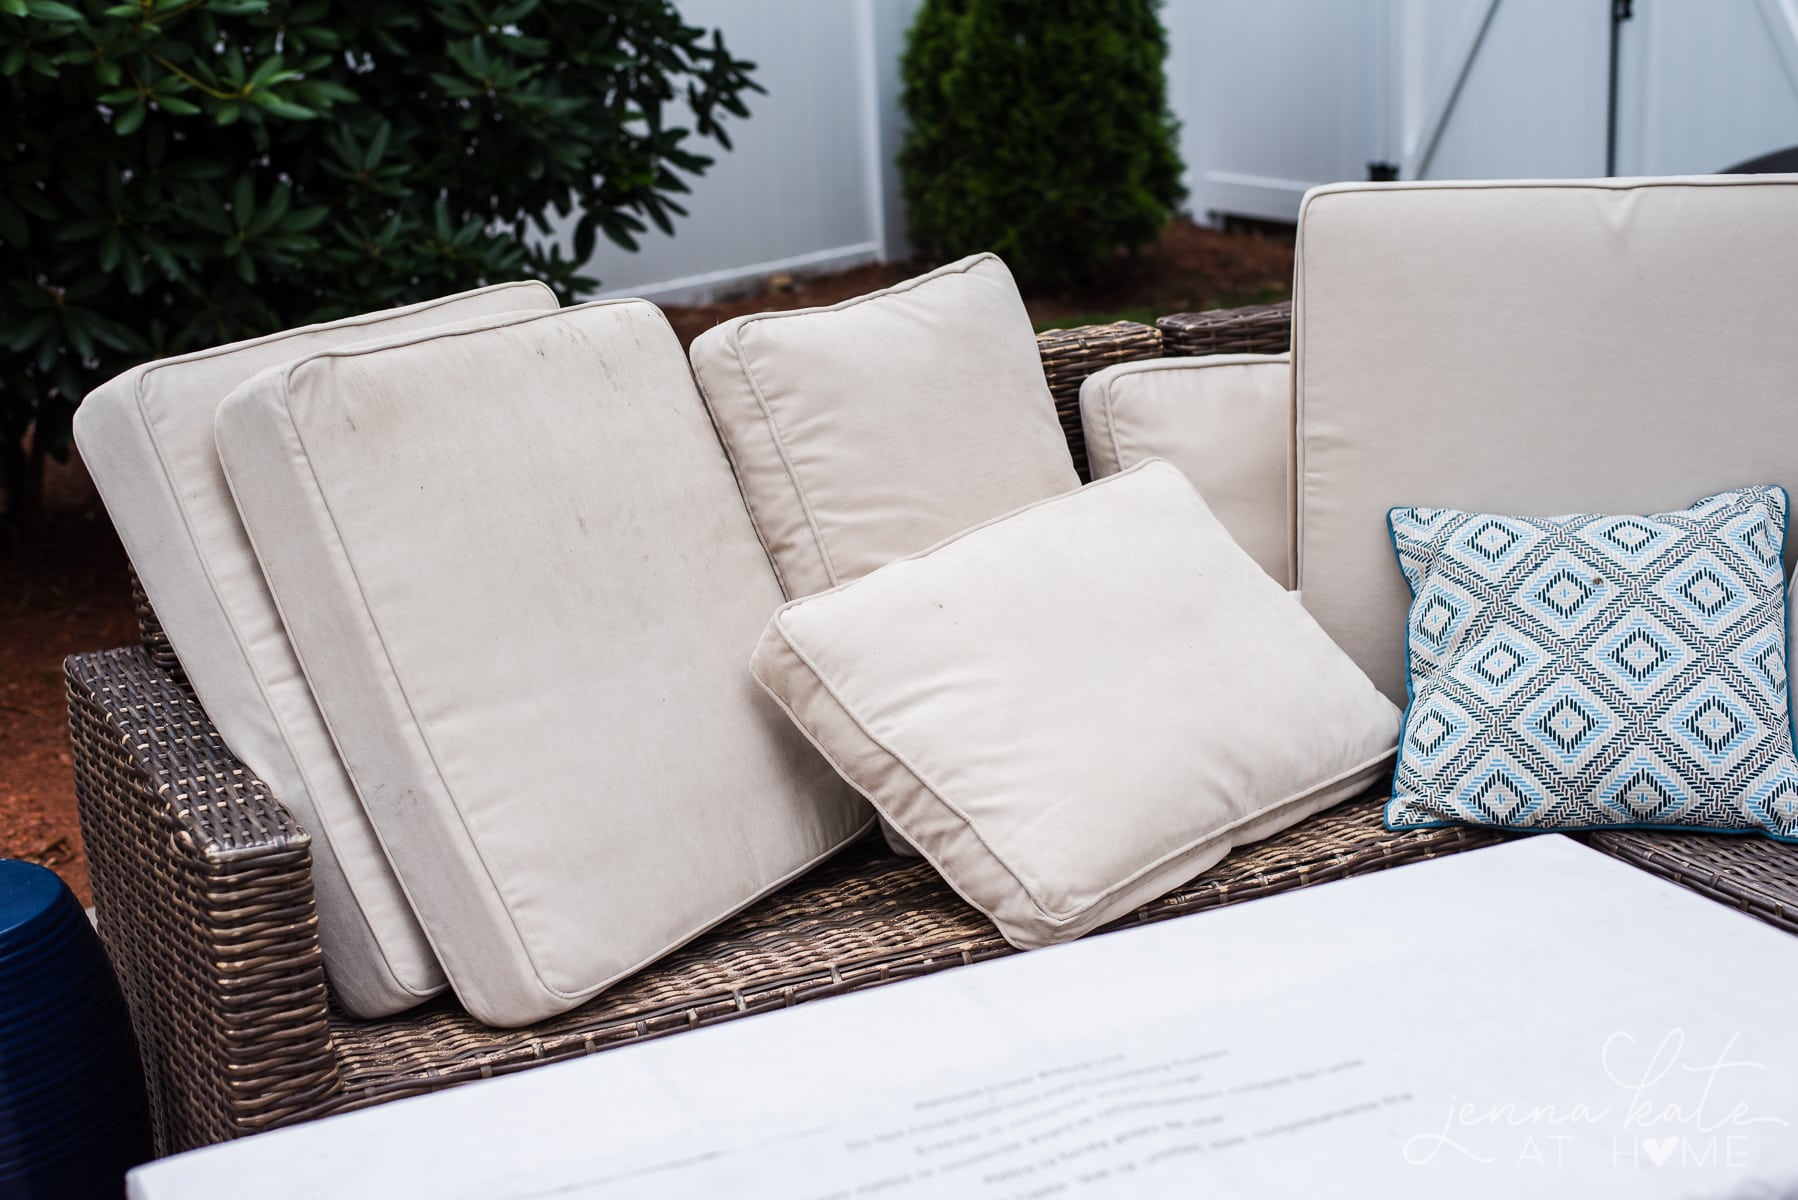 How To Clean Outdoor Cushions Jenna, How To Deep Clean Outdoor Cushion Covers